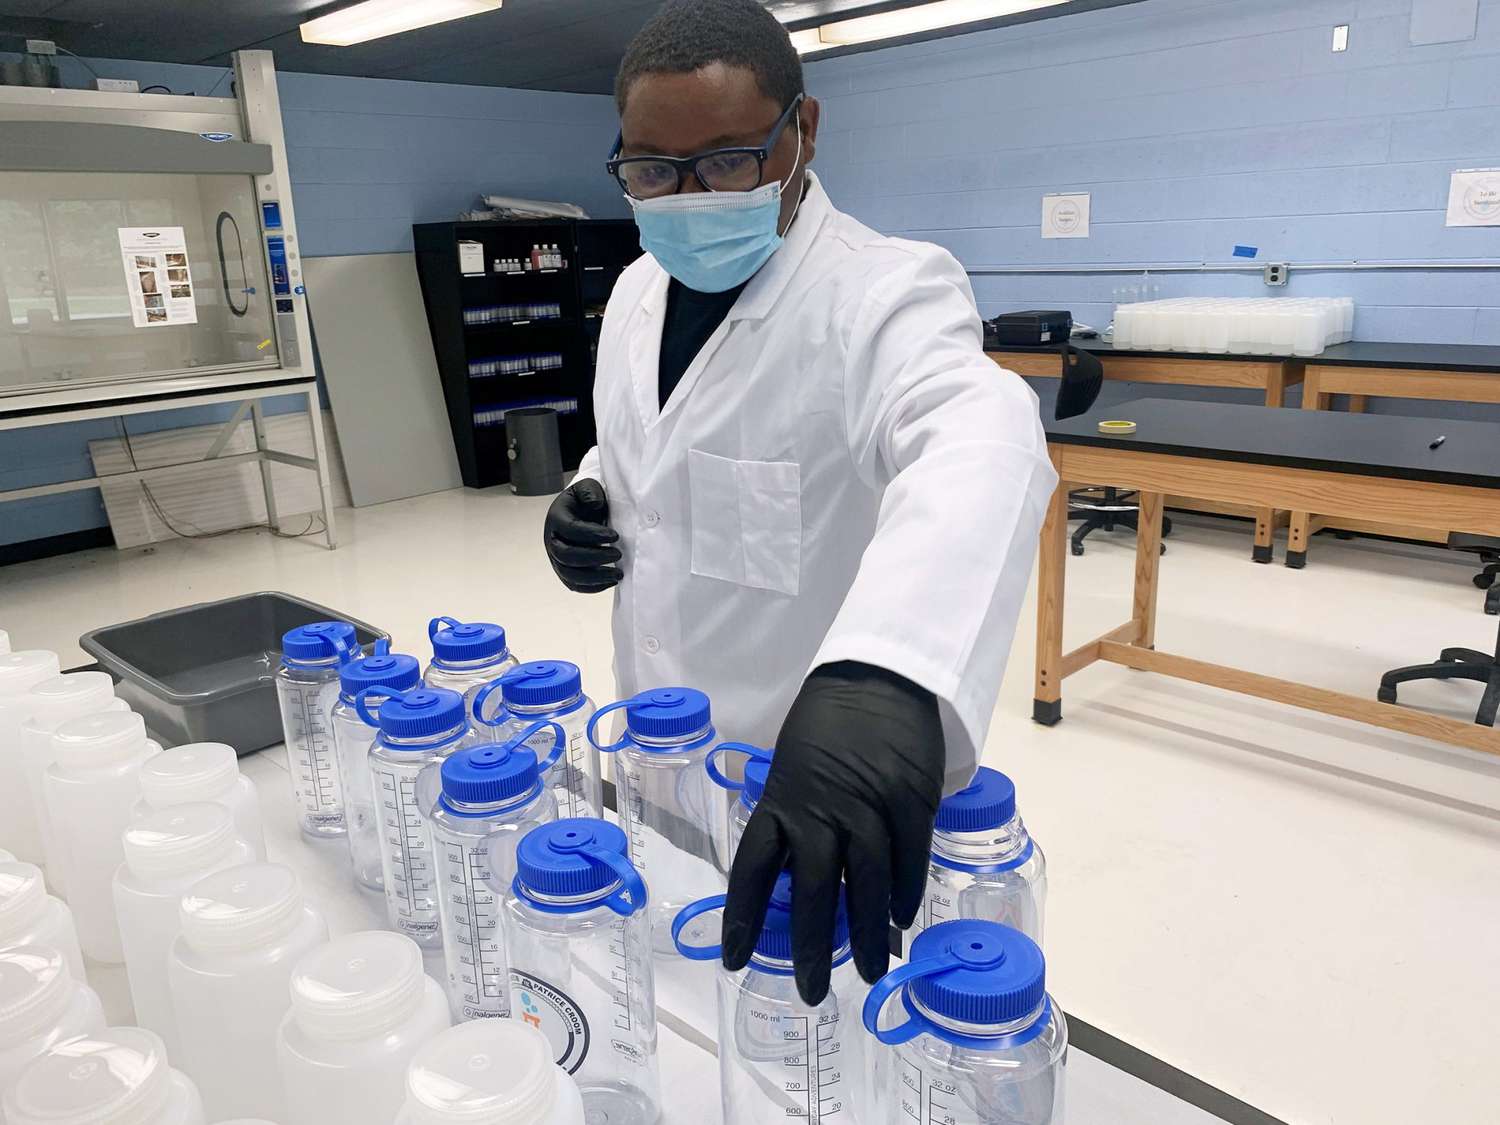 Local Teens Help Solve Flint's Water Crisis with New Lab and Water Testing: 'It Gives Me Hope' - PEOPLE